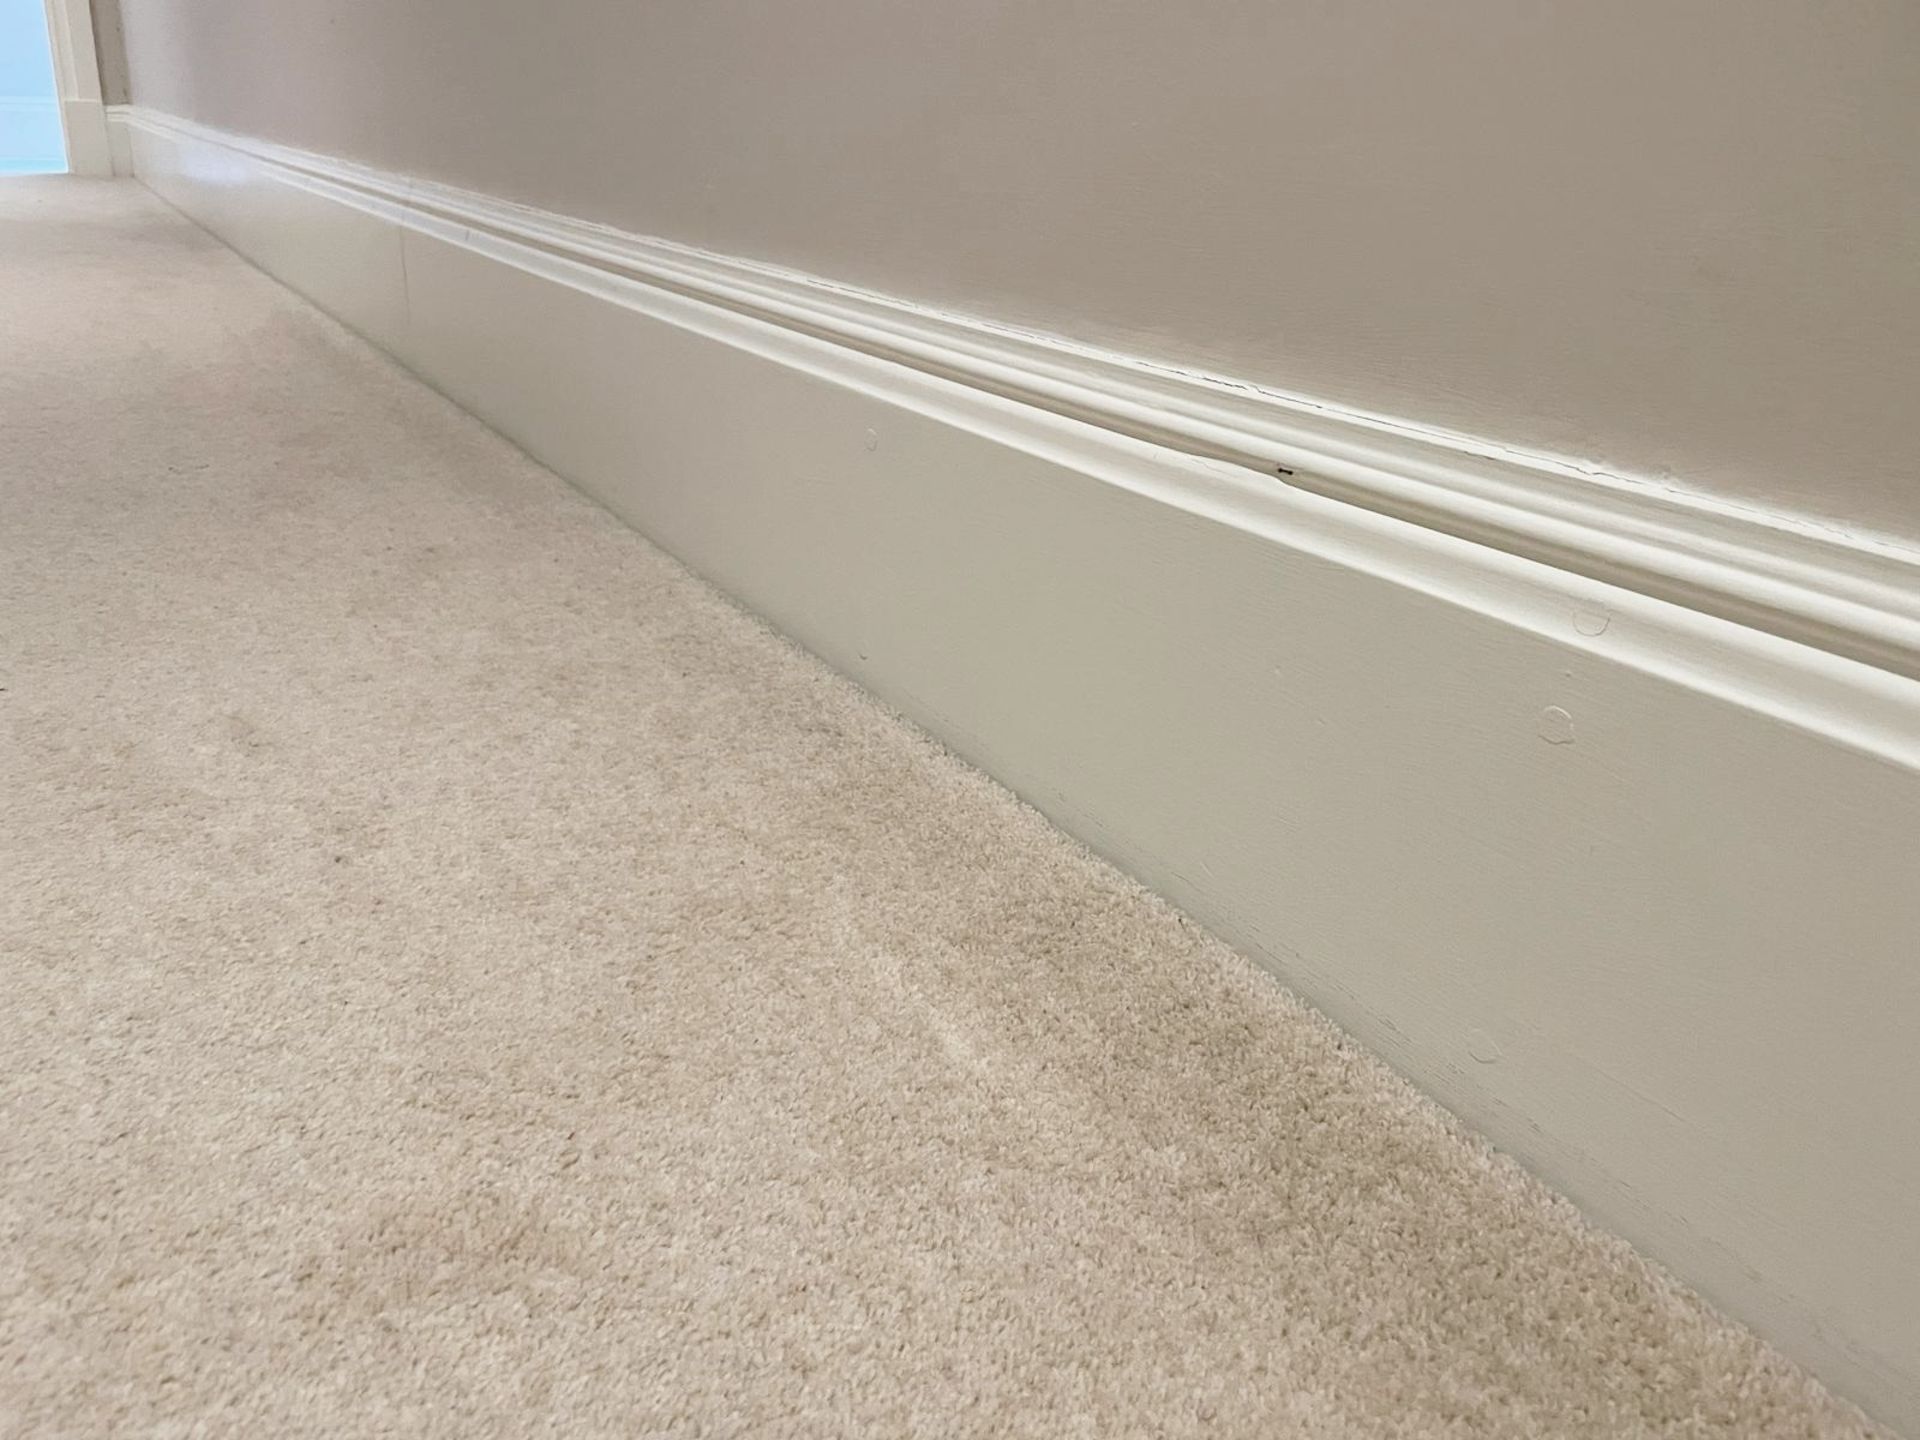 Approximately 15-Metres of Painted Timber Wooden Skirting Boards, In White - Ref: PAN257 - Image 2 of 2